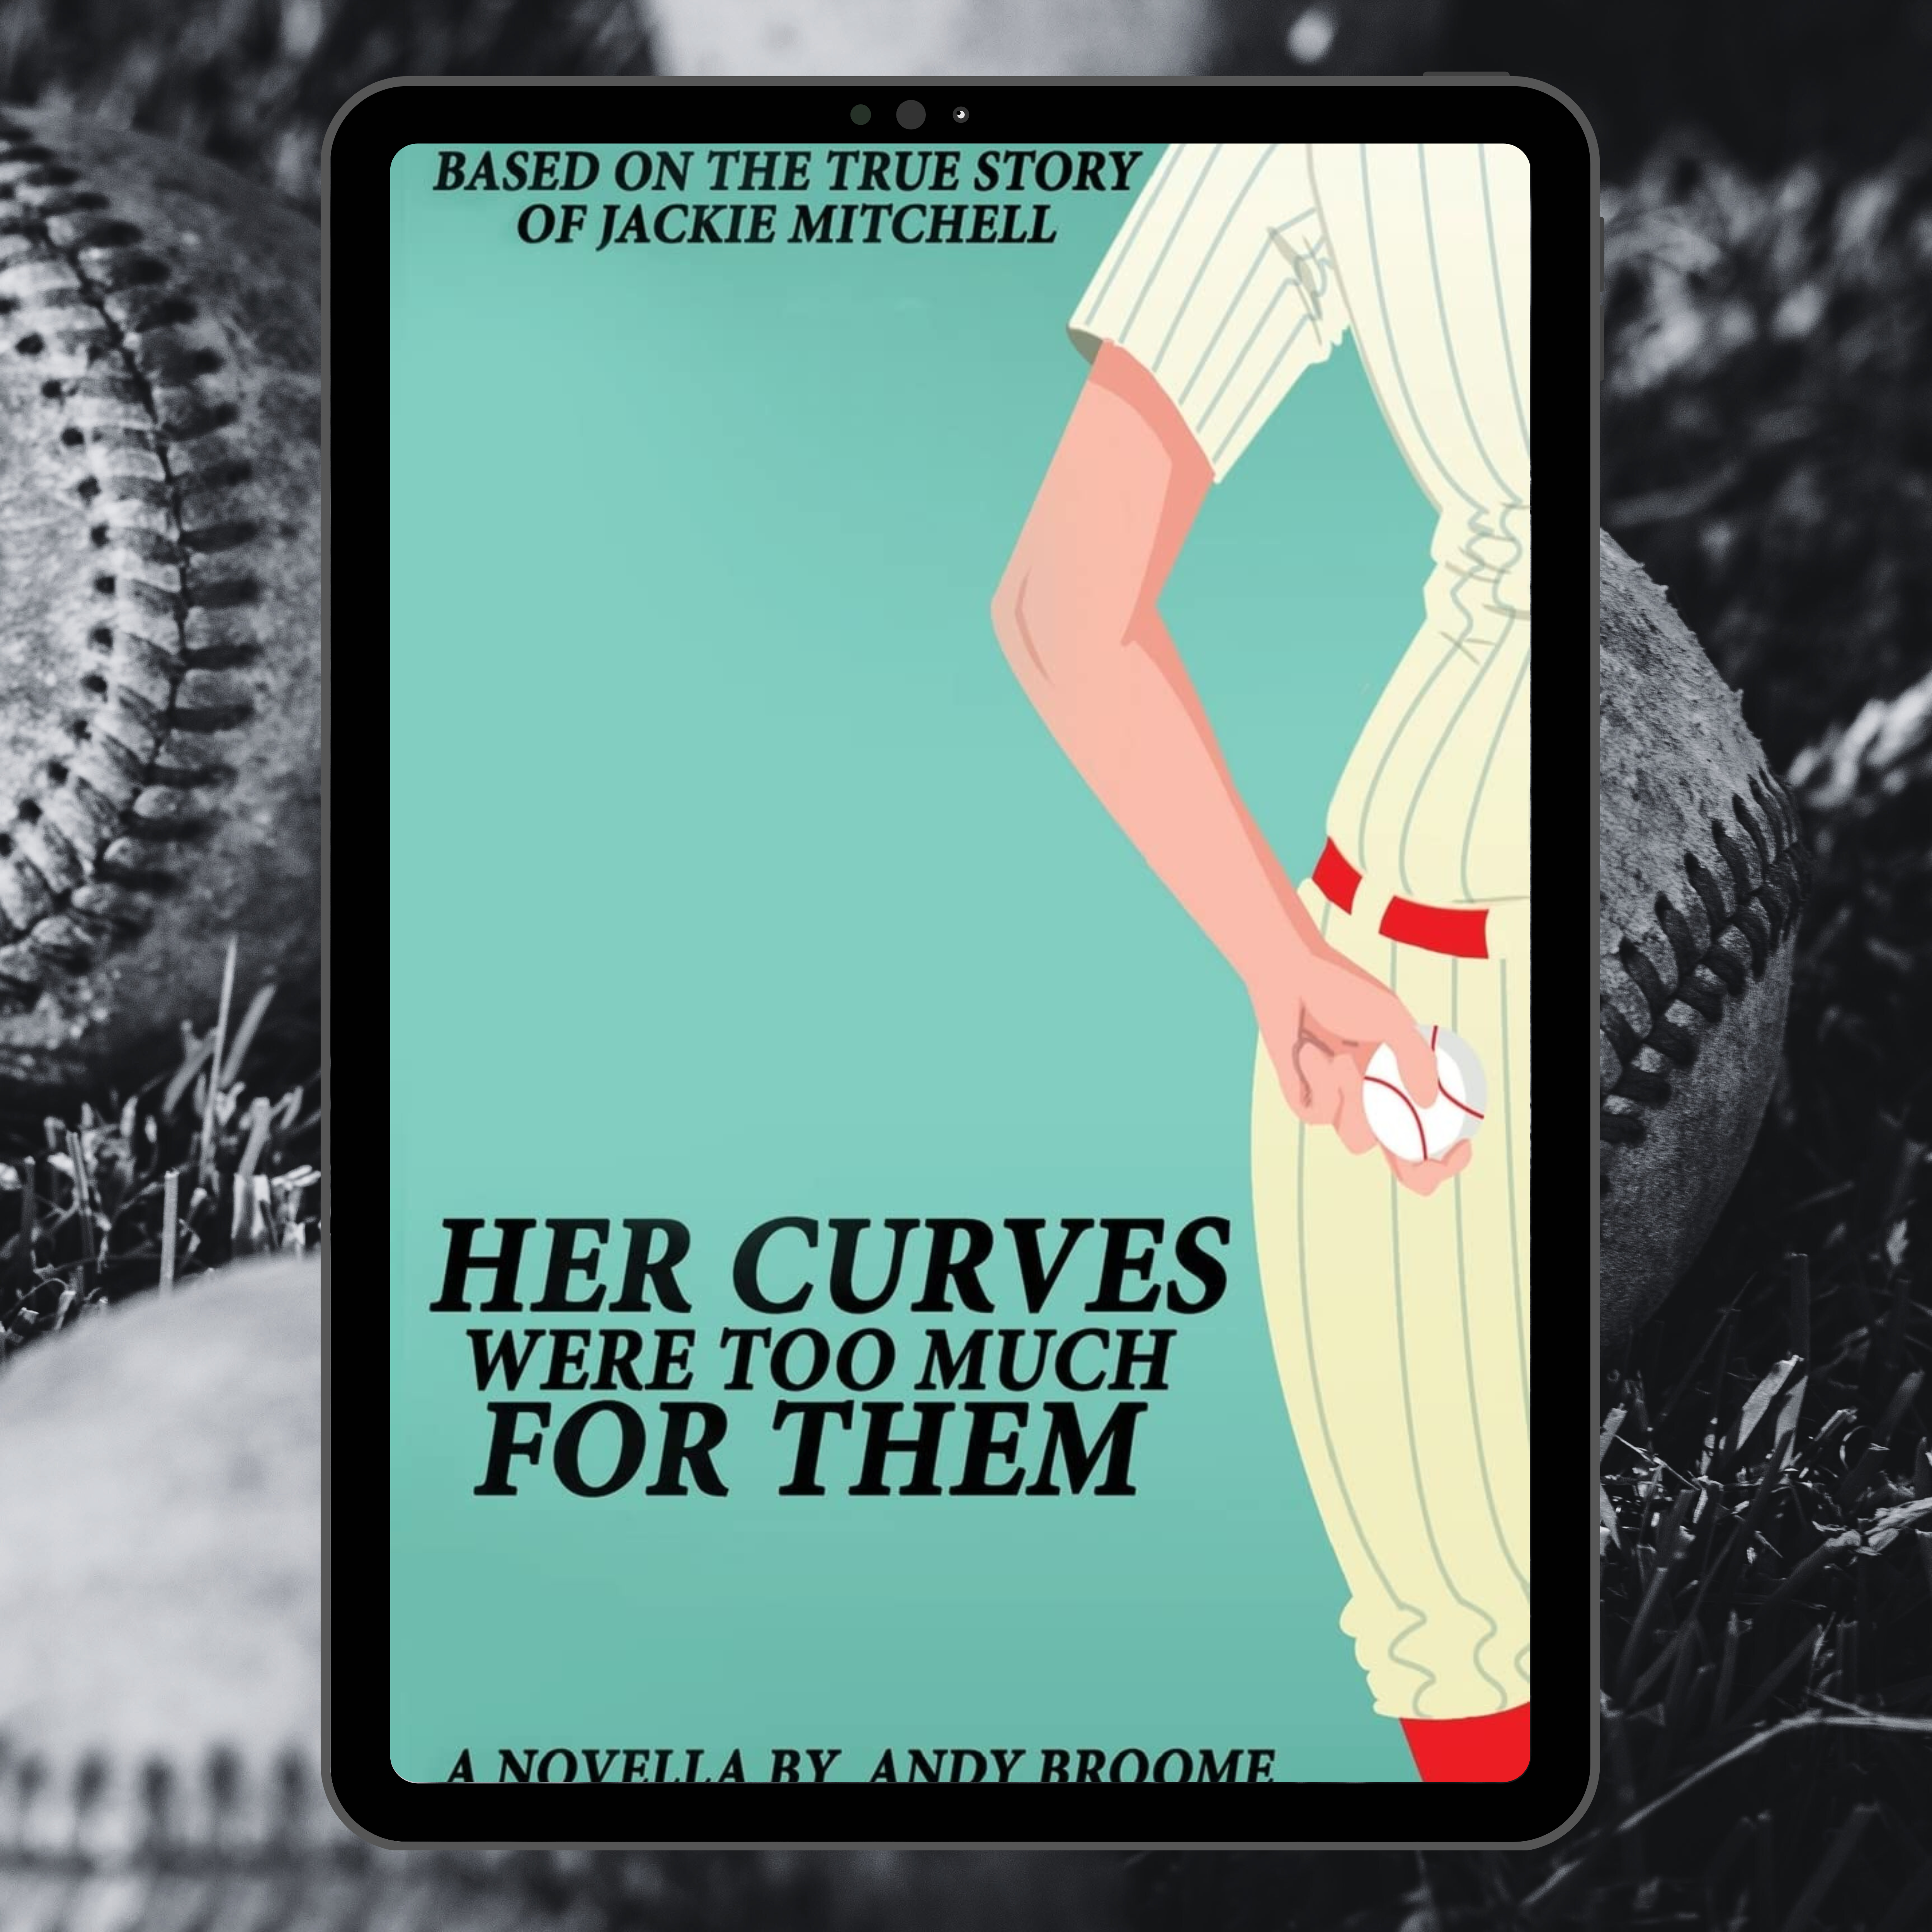 Her Curves Were Too Much For Them. A Novel by Andy Broome.